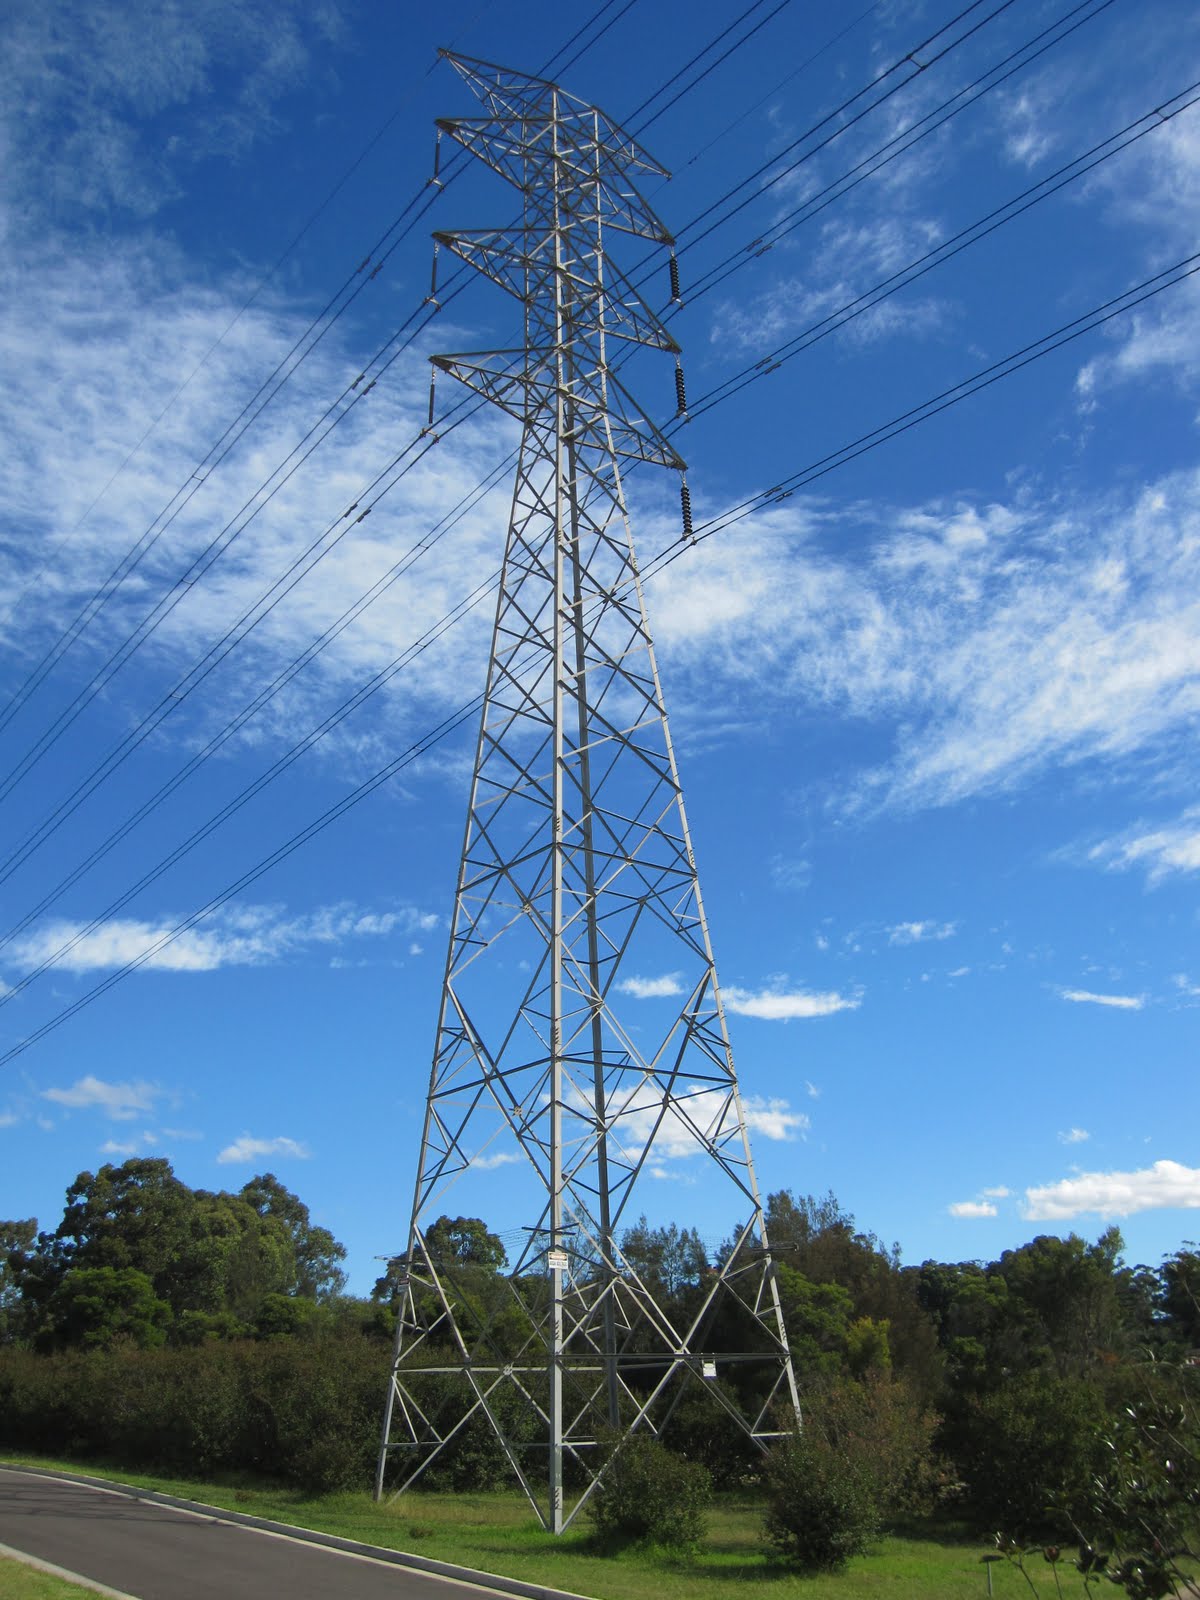 Sydney - City and Suburbs: Rookwood, power lines